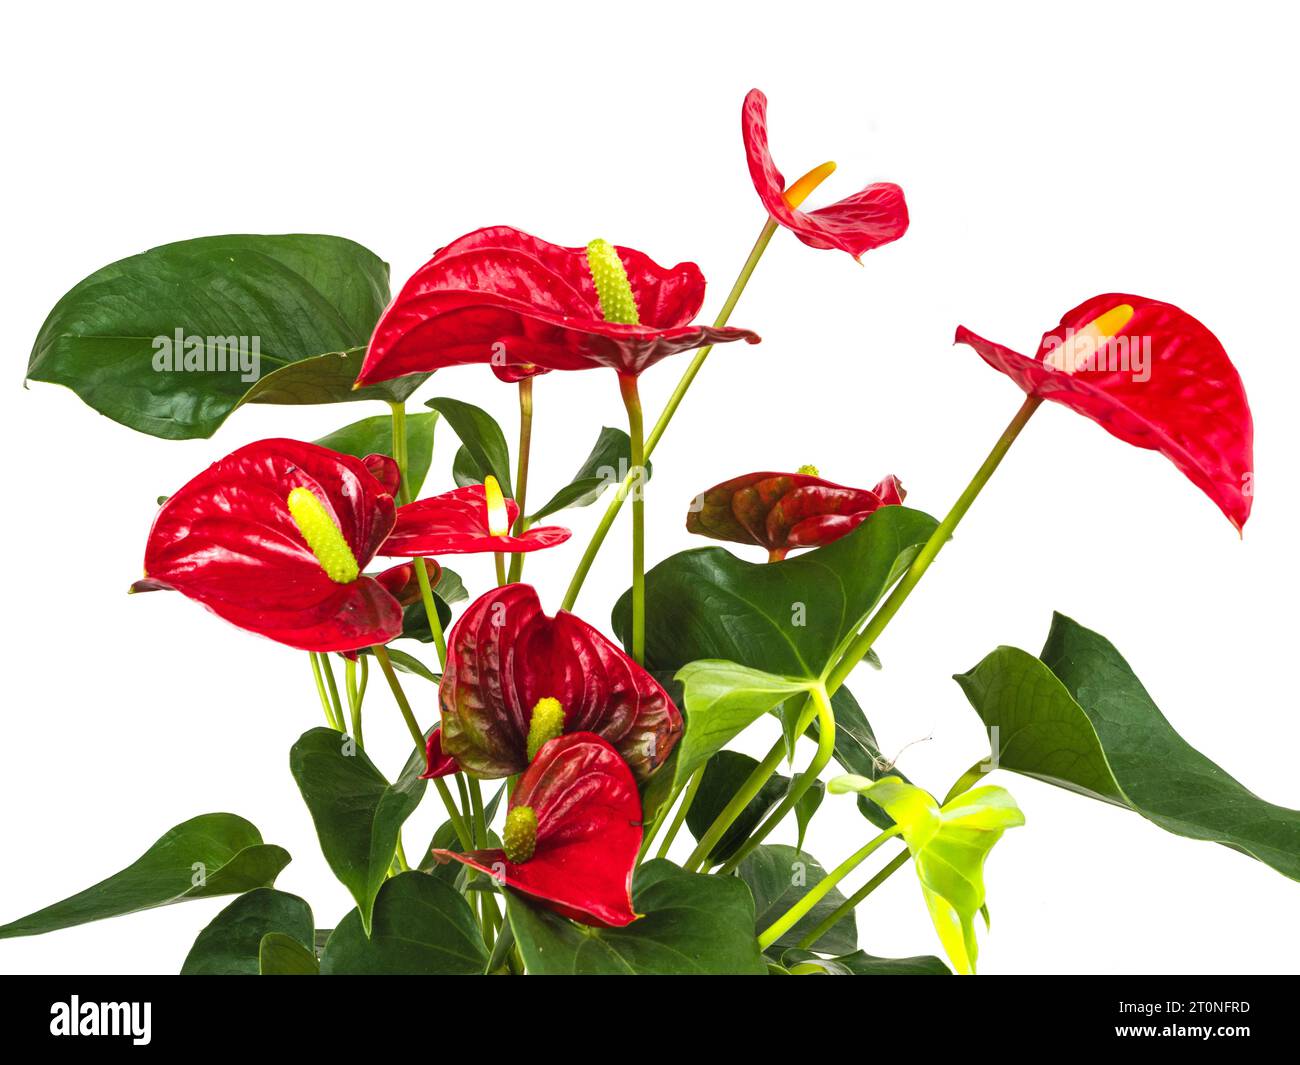 Red spathes and white to yellow spadices of the tender evergreen houseplant, Anthurium andreanum Stock Photo